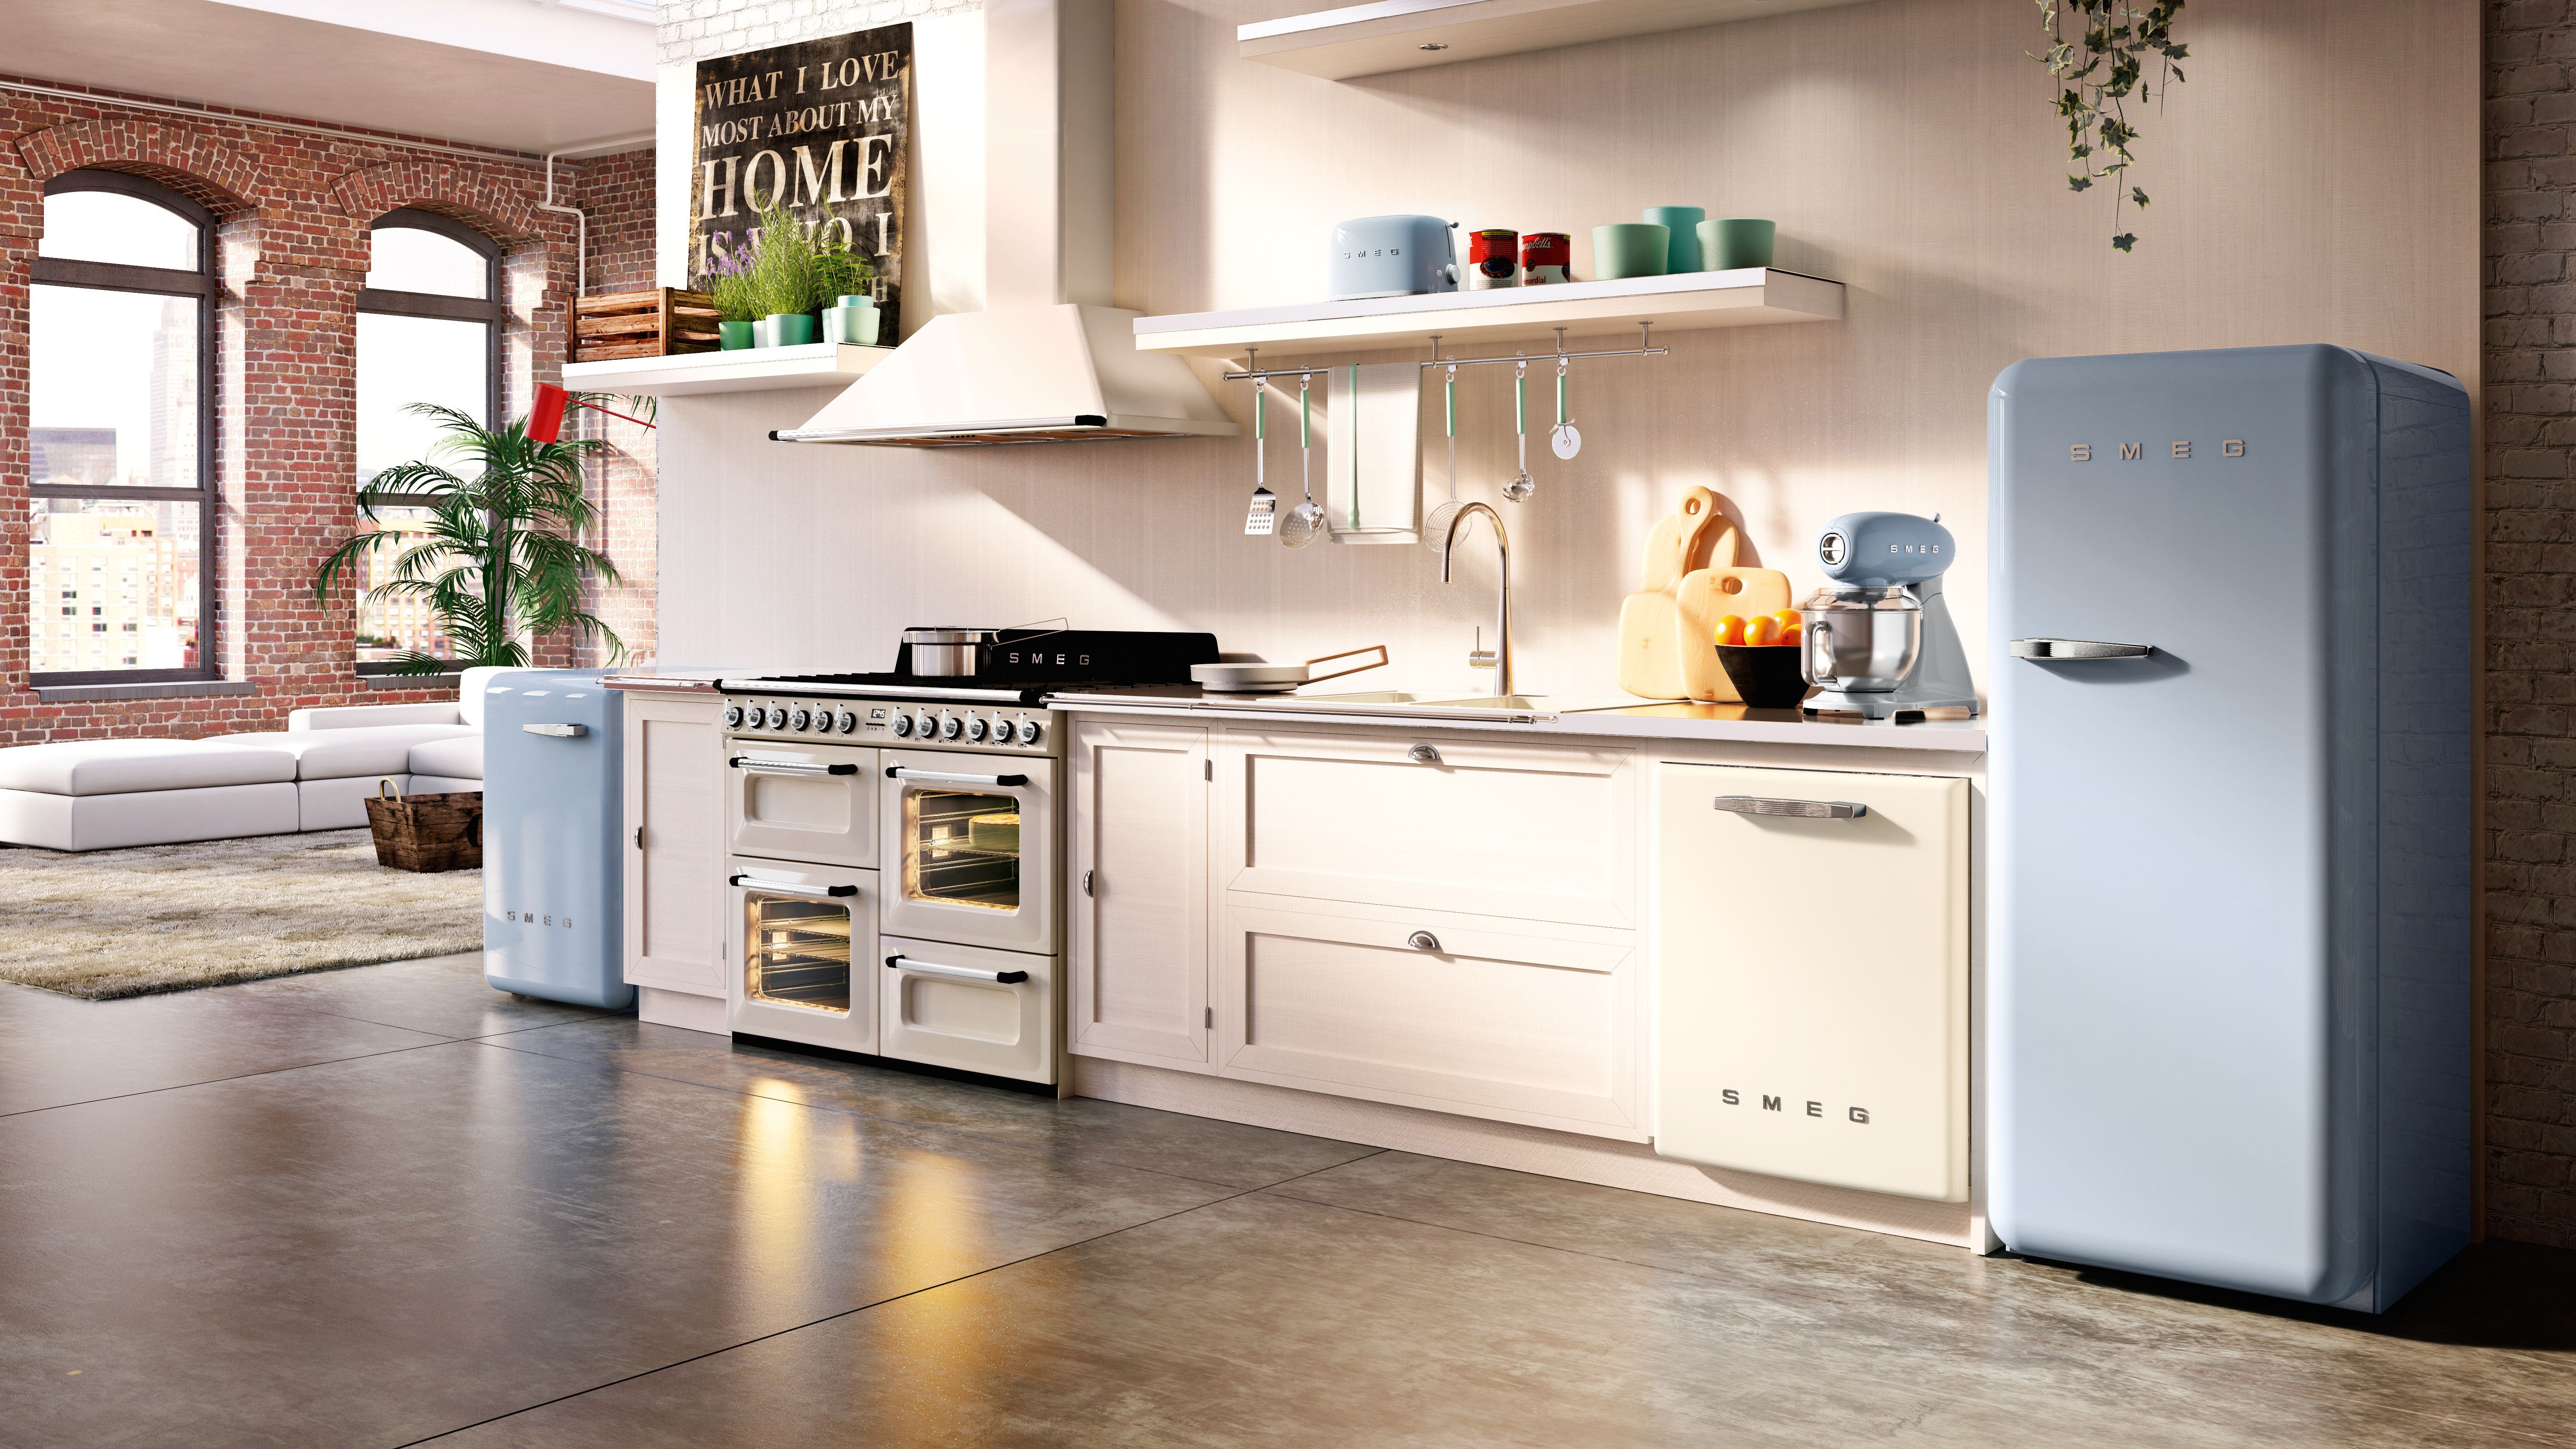 Bonus Cash Card Up To $800* In The Smeg Sale at Hart & Co